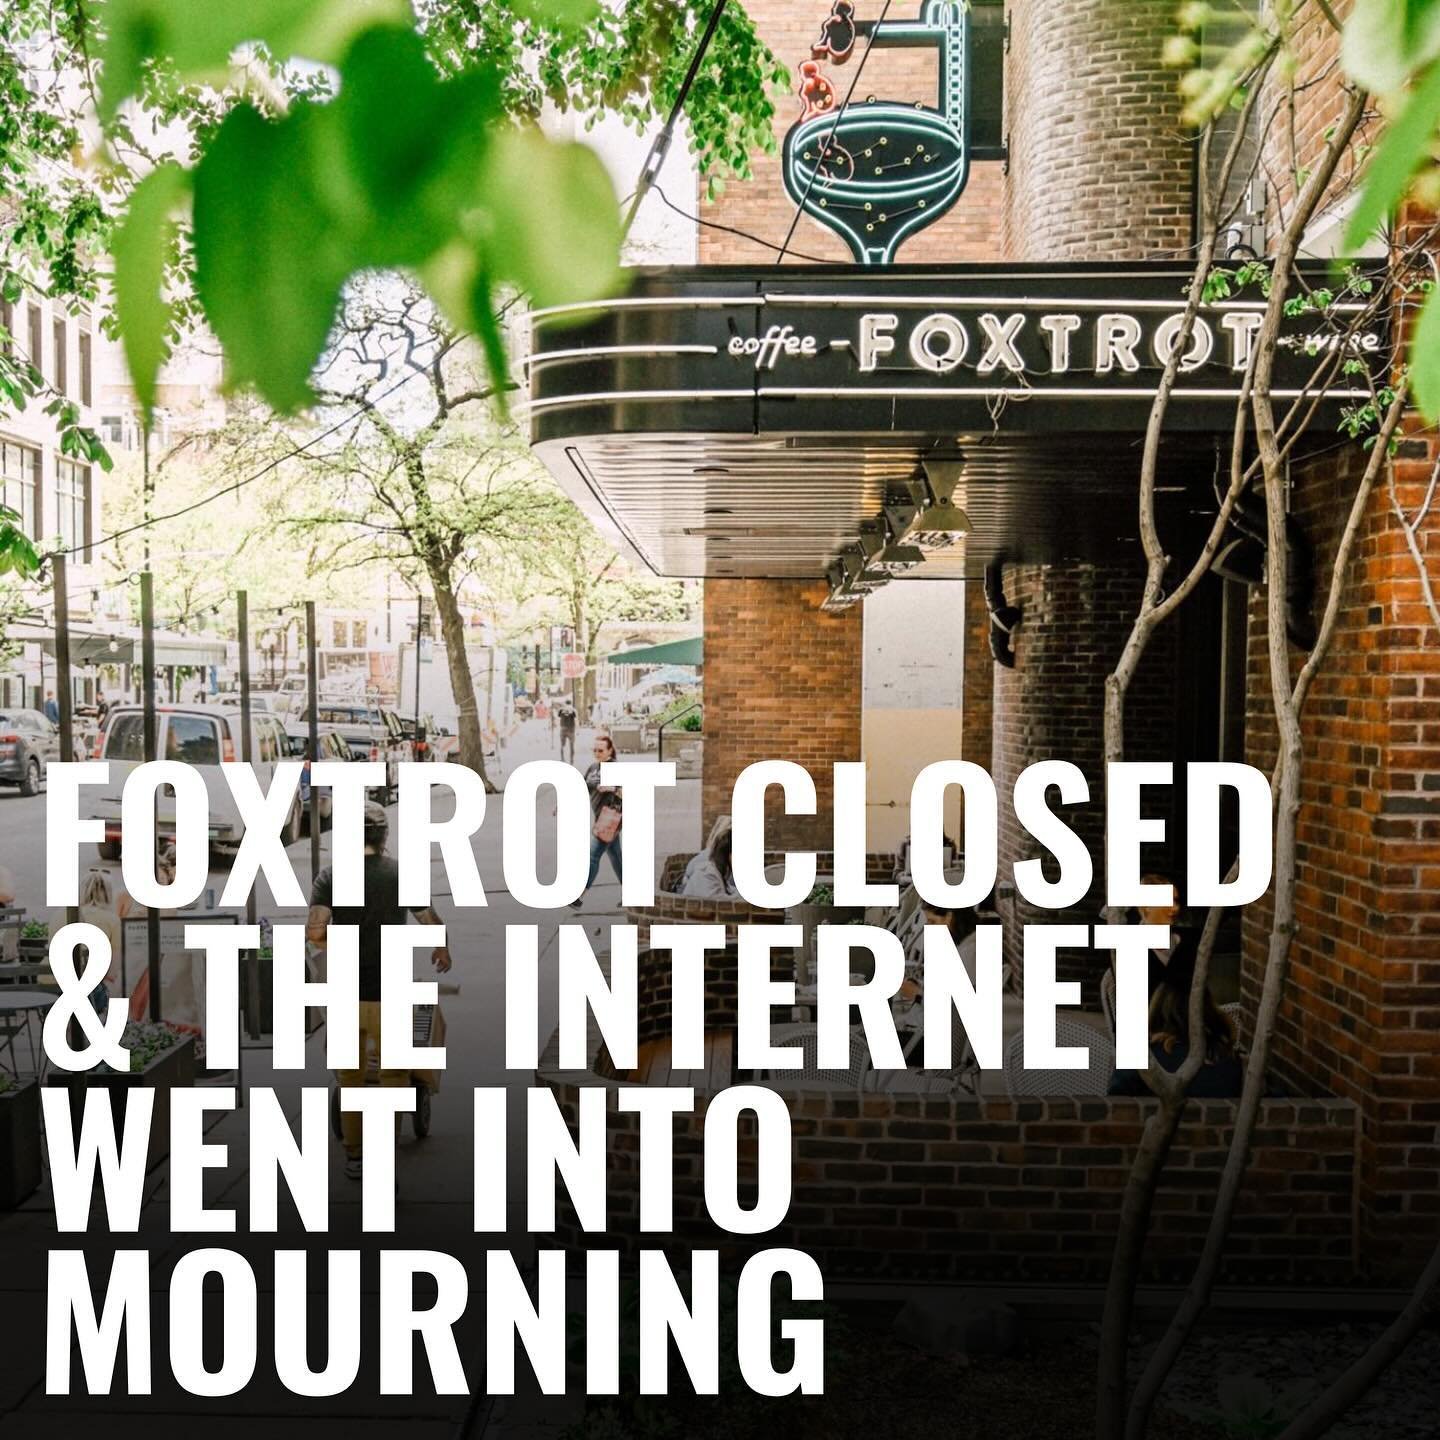 Perhaps it was just us (we don&rsquo;t think so), but Foxtrot wasn&rsquo;t something we had heard much about, and then all of a sudden, it was all over our socials. Like, unavoidable. We&rsquo;ll refrain from further commentary on why they closed and